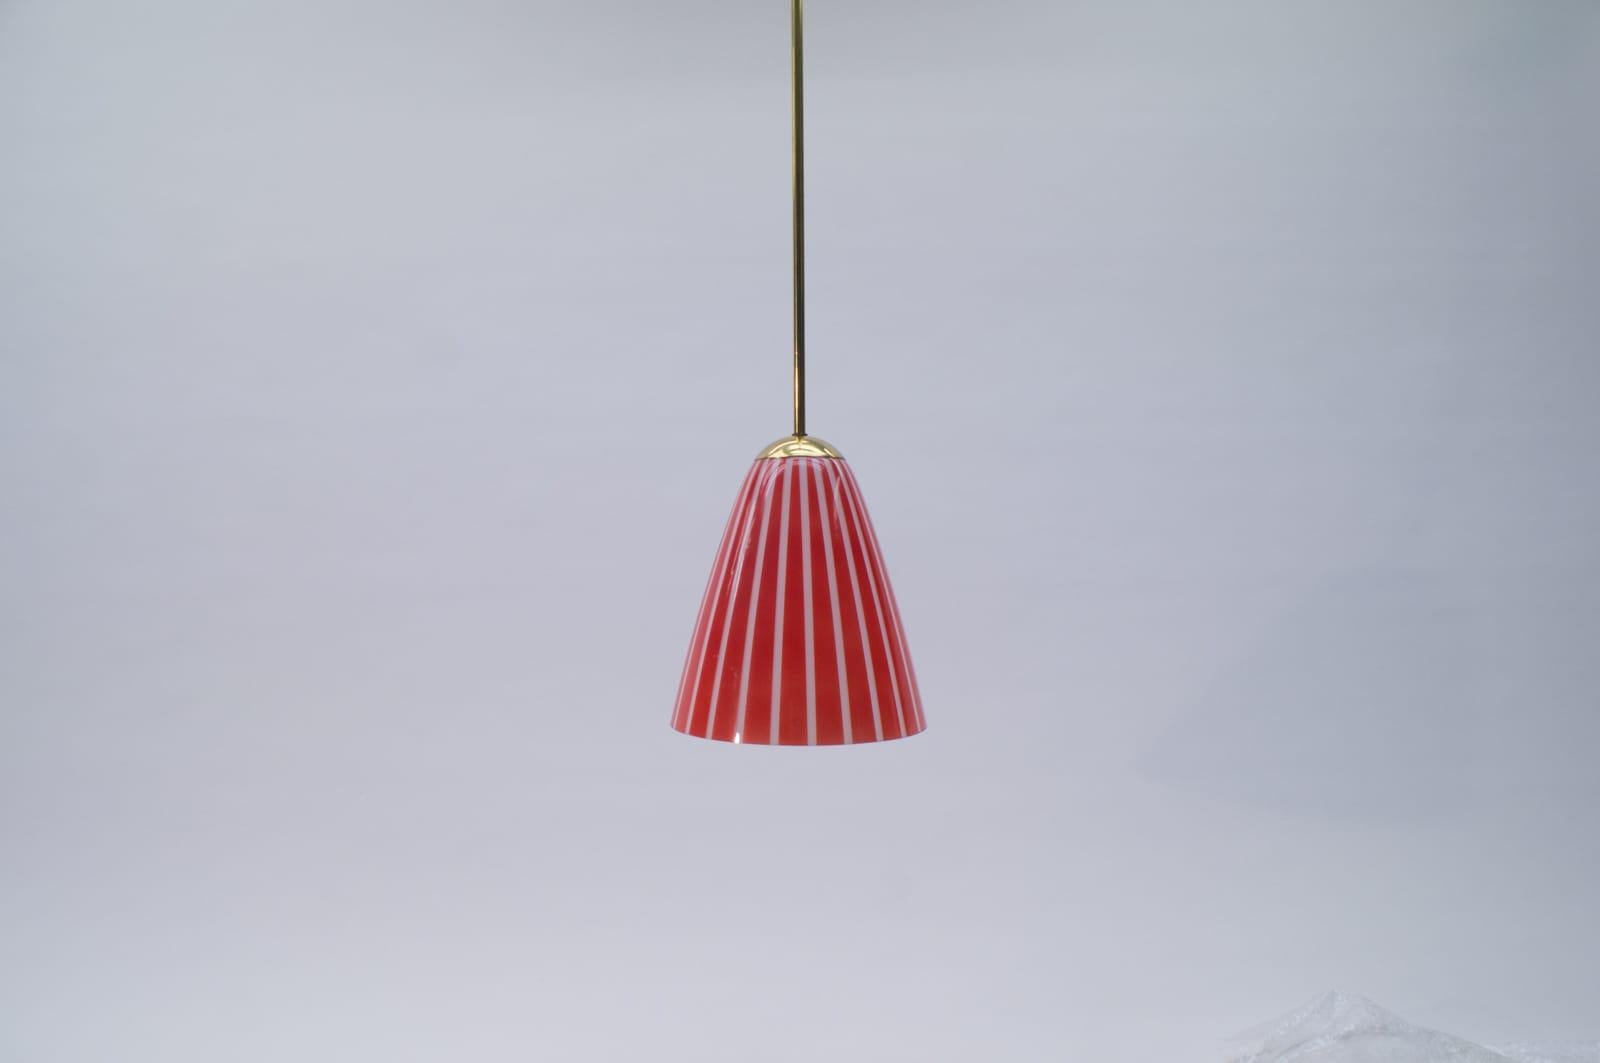 Mid-20th Century Elegant Mid-Century Modern Pendant Lamp Made of Brass and Glass, 1950s Austria For Sale